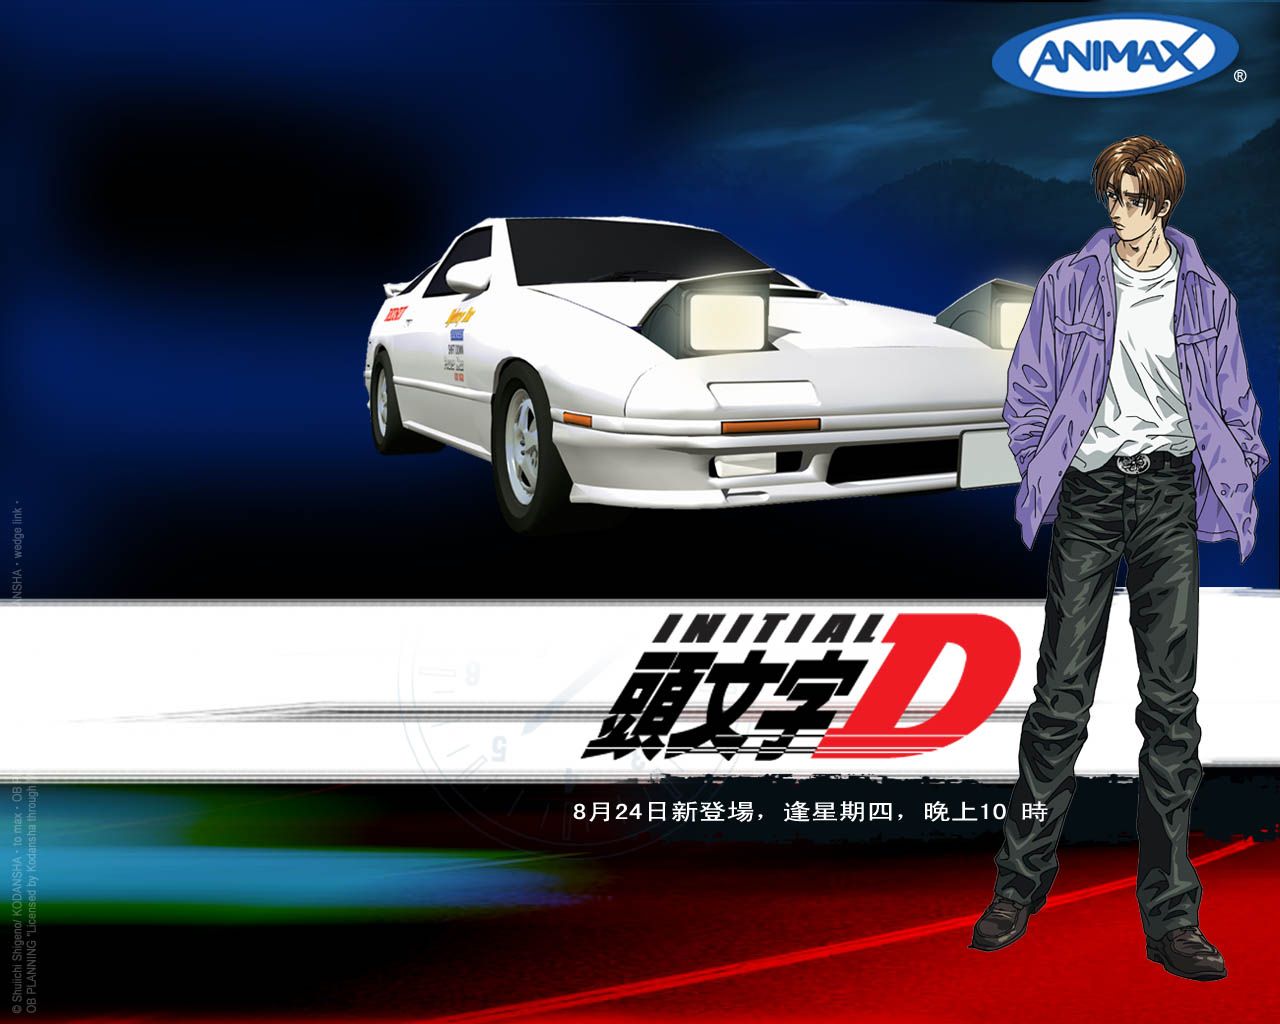 Wallpaper de Initial D Second Stage. Ae Anime, Stage